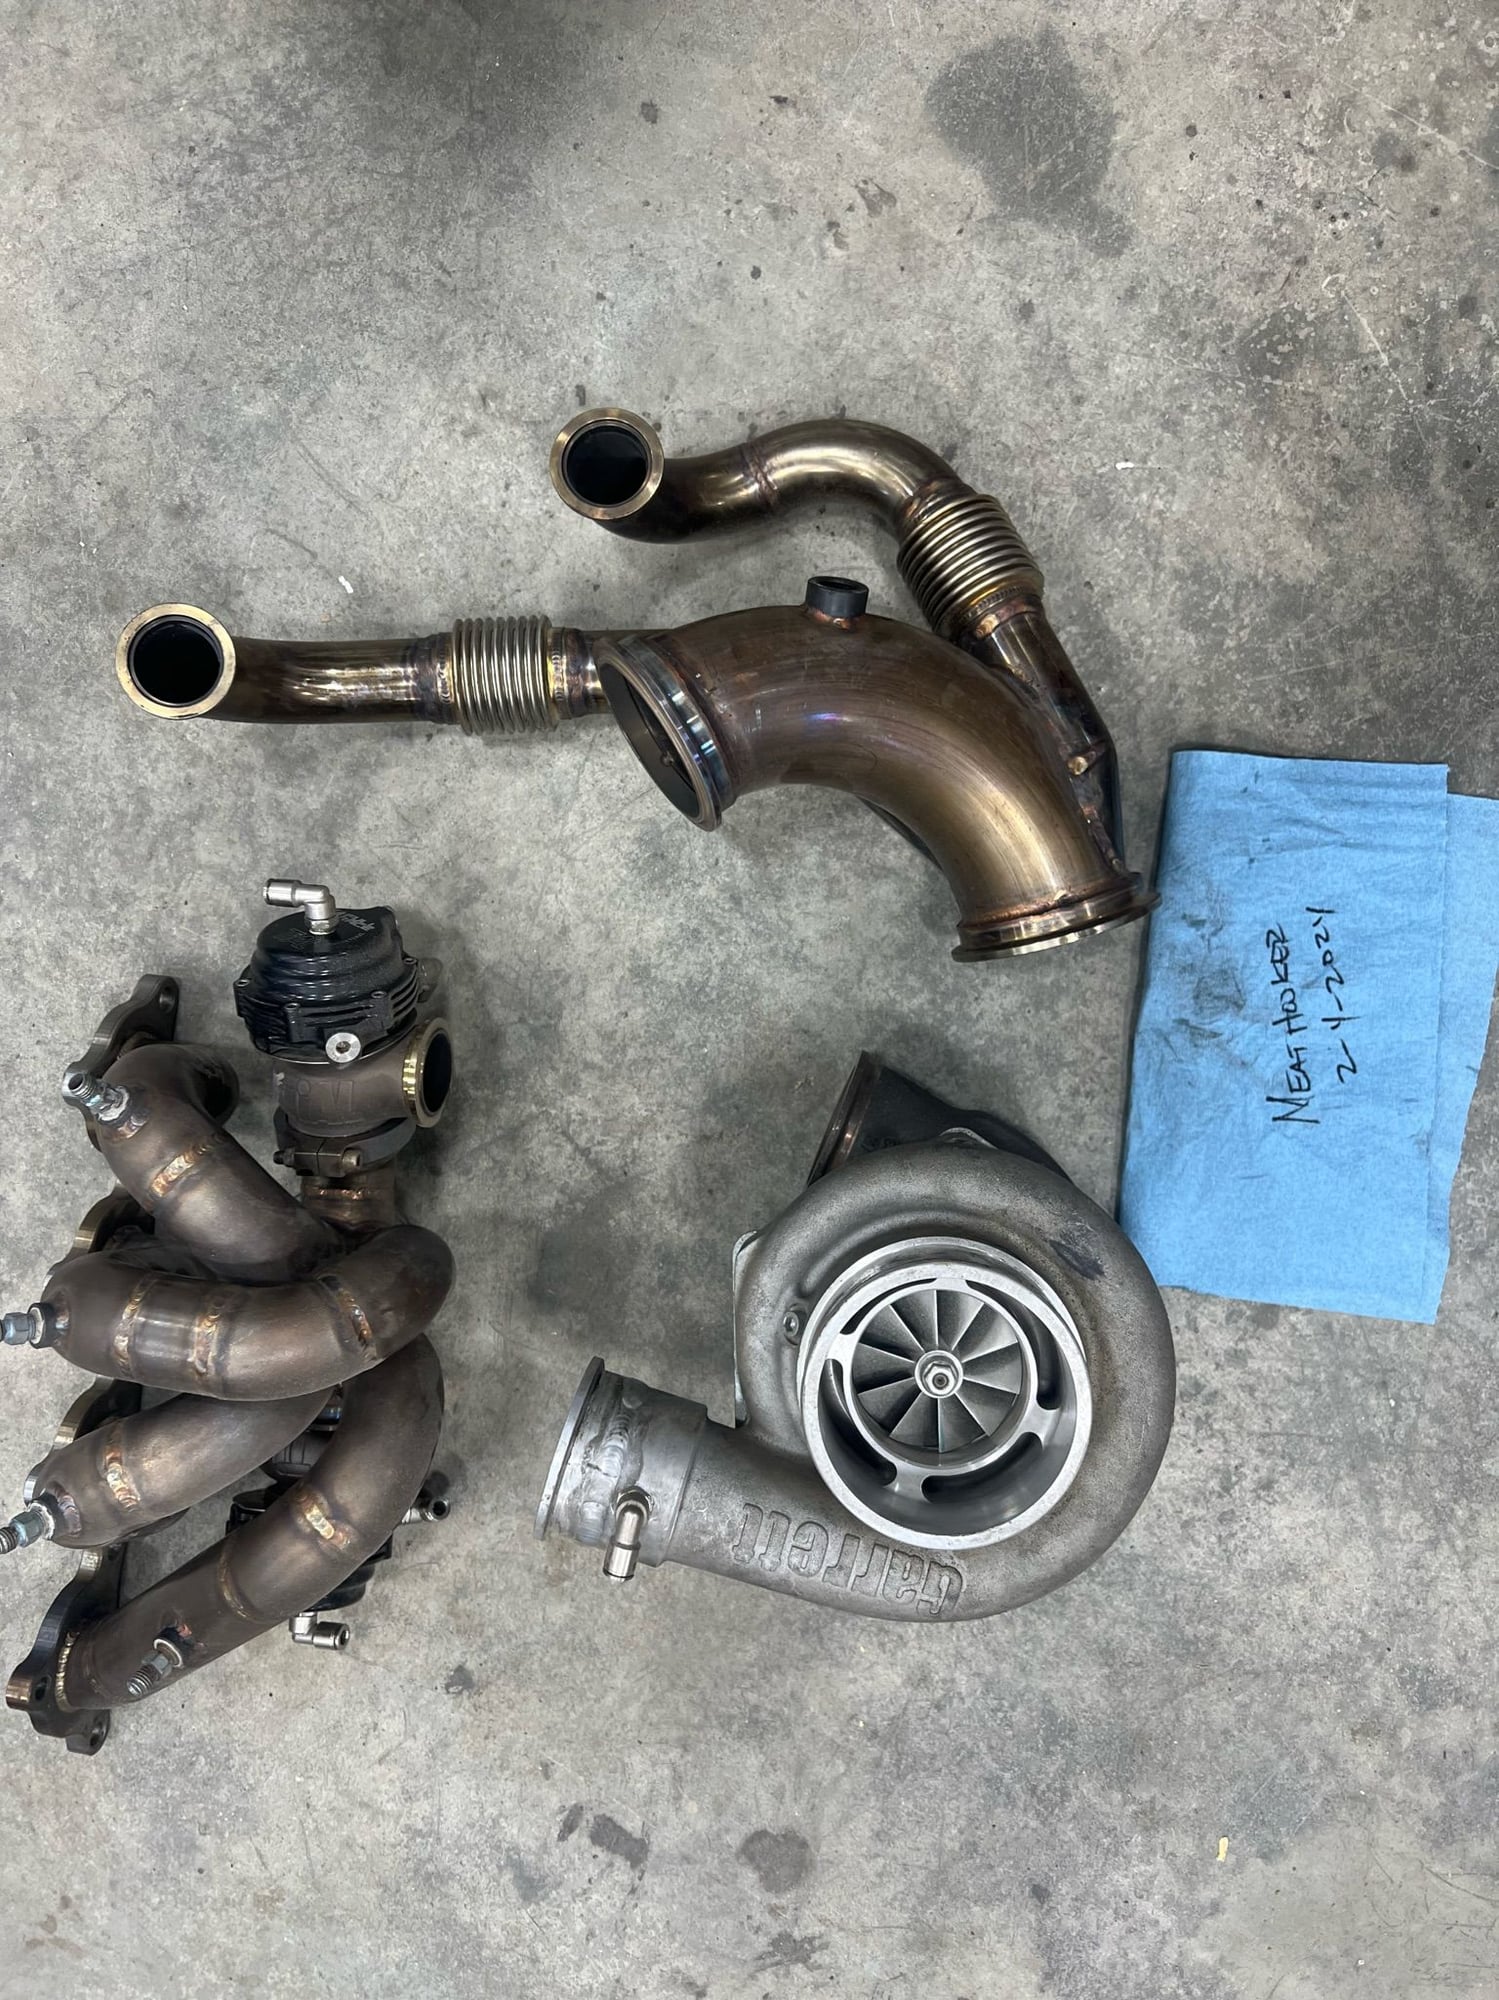 Engine - Power Adders - Gtx3582 gen 2 with Driven Fab dual WG manifold - Used - Boise, ID 83642, United States